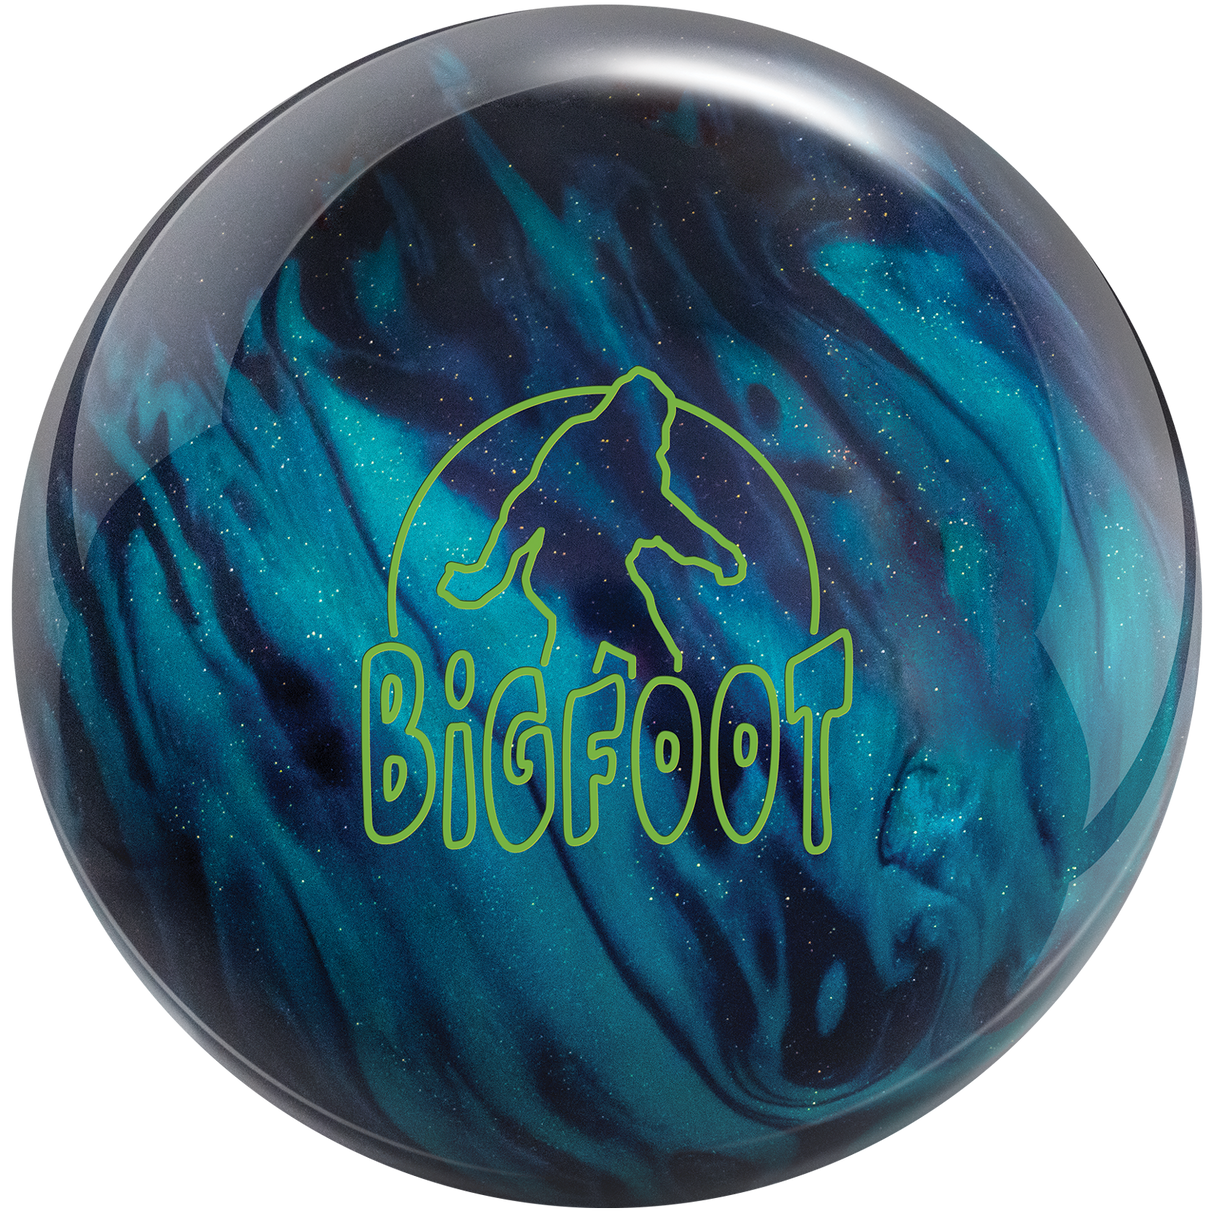 The Bigfoot is getting an upgrade. The Bigfoot Hybrid is Radical’s newest launch, but it’s not just a mix of a solid resin with a pearl resin. Enter HyperKinetic22. This is a new chemical compound made available through the hard work of our chemists. Radical Bowling Technologies Inside Bowling Pro Shop. Free shipping.